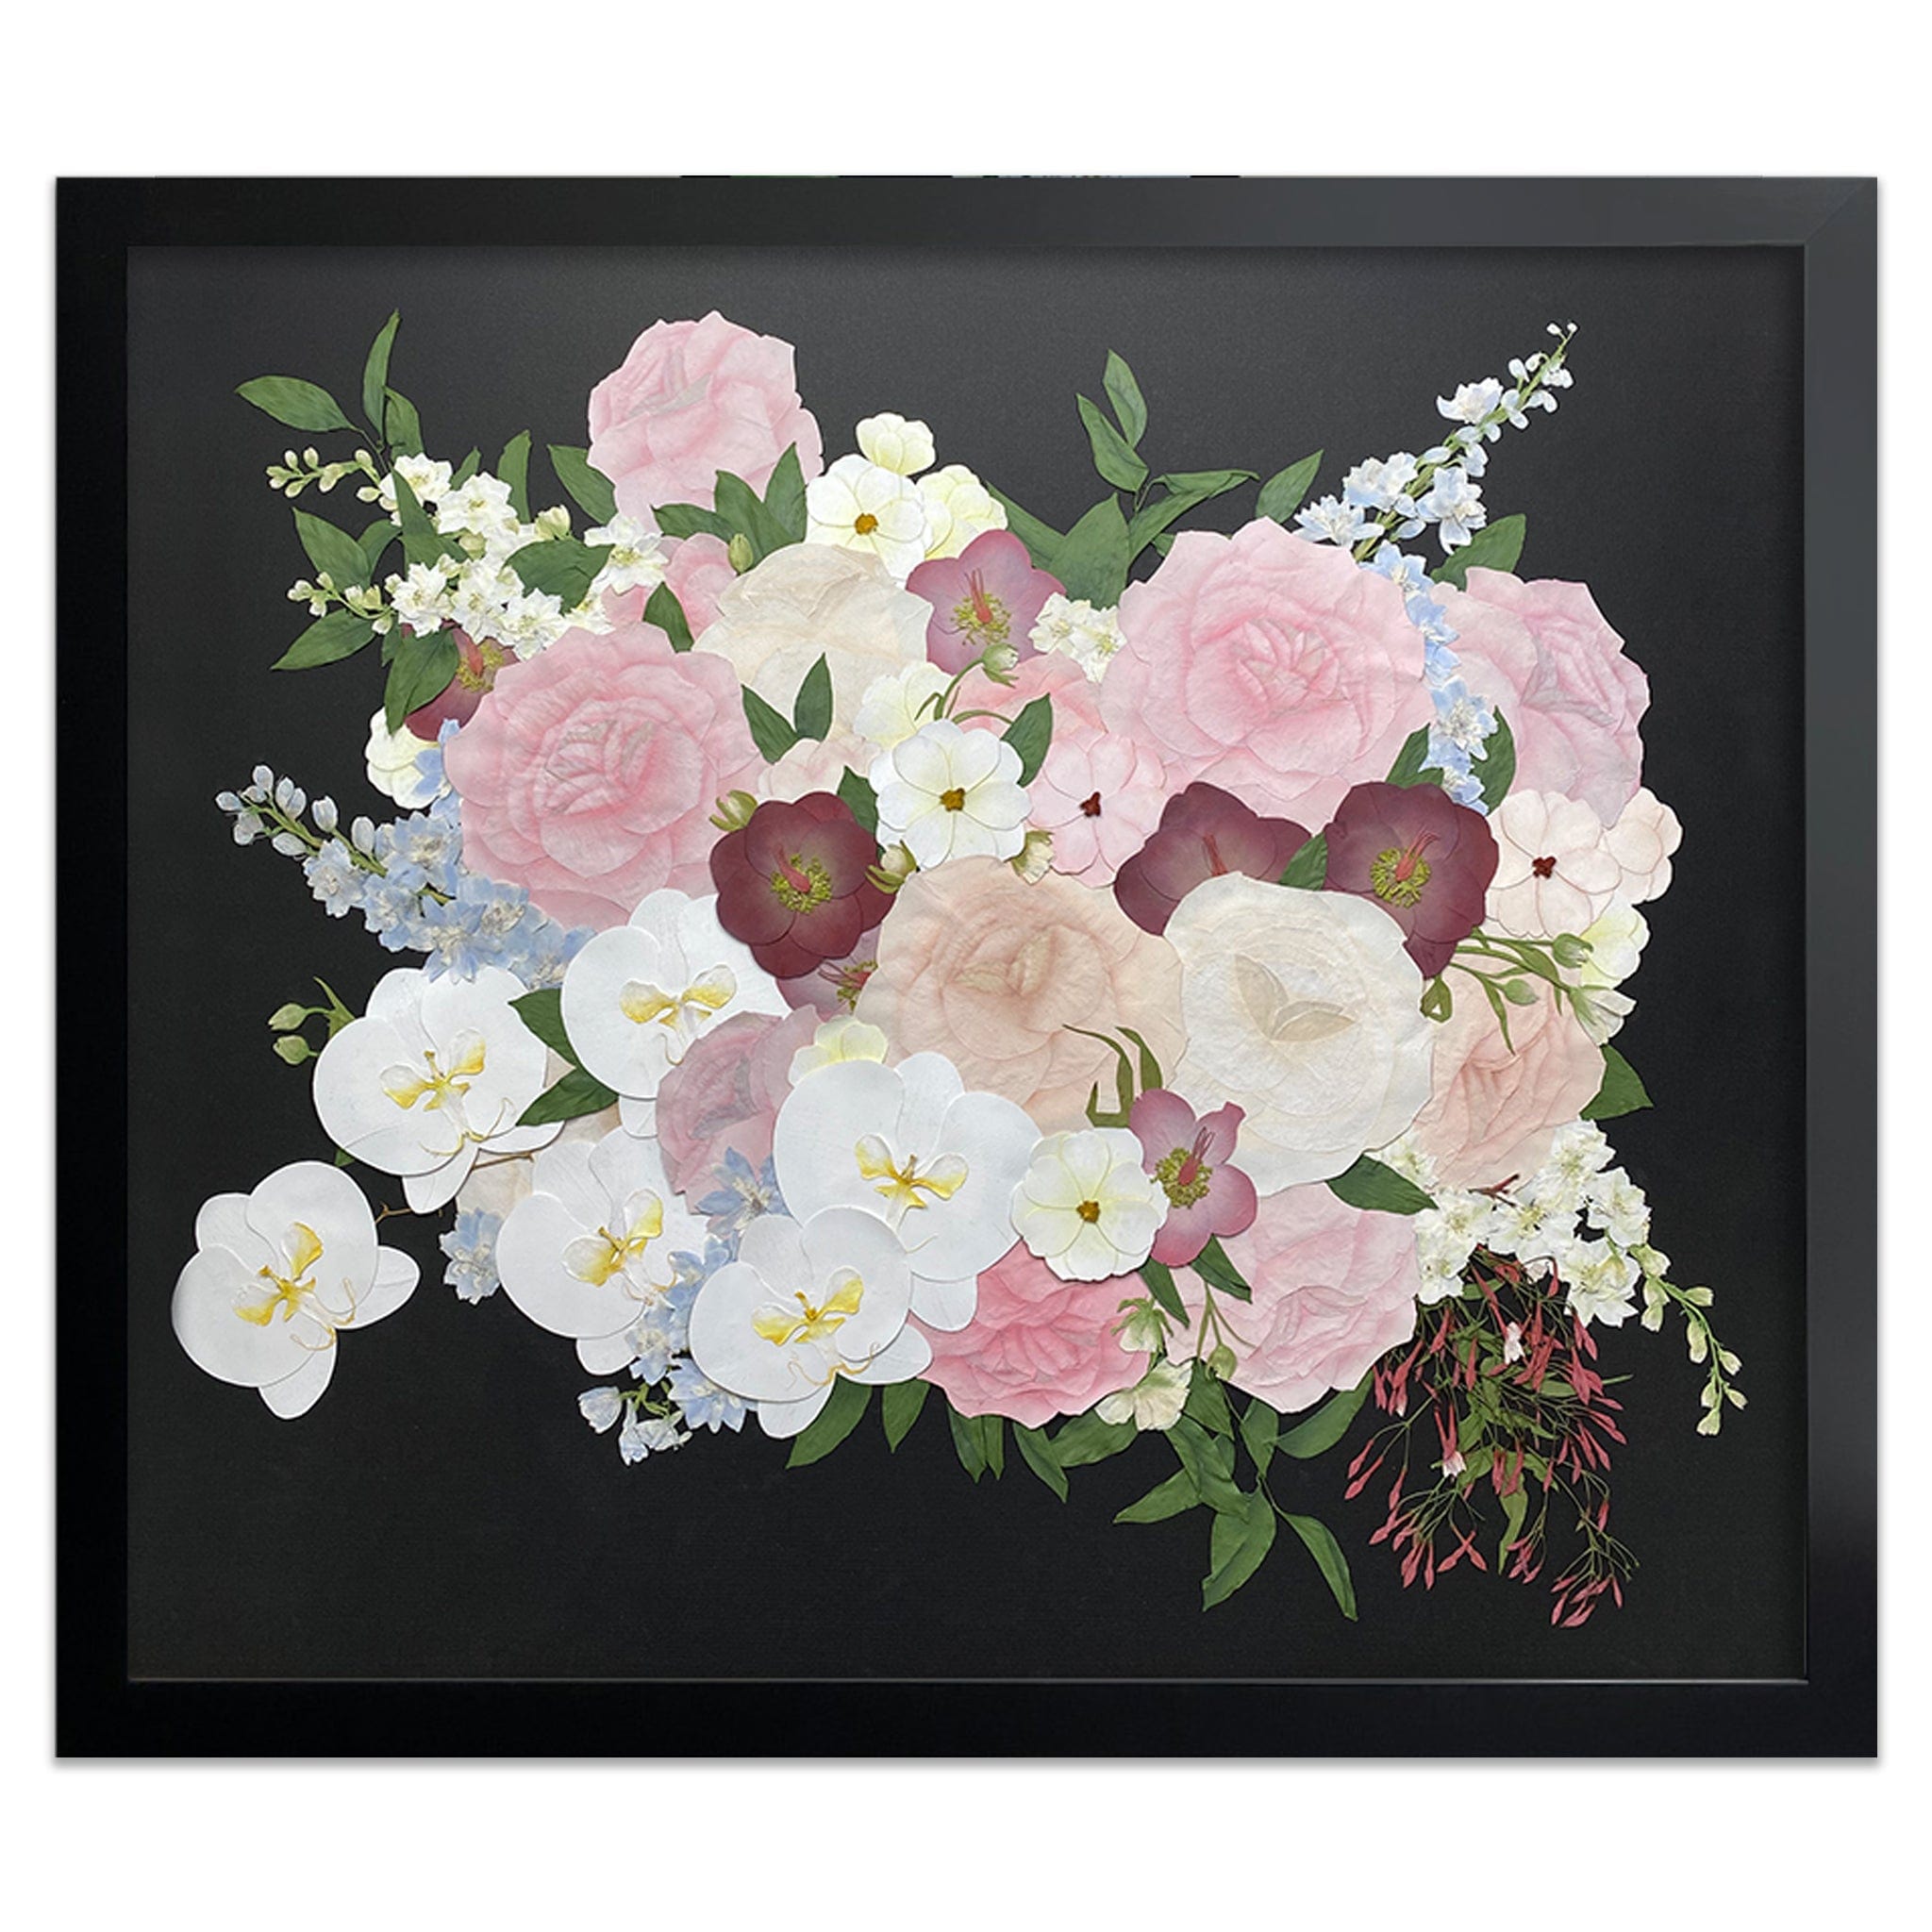 Designs by Andrea Pressed (Framed) 24" x 28" / Rectangle / Extra Large 24" x 28" Classic Frame